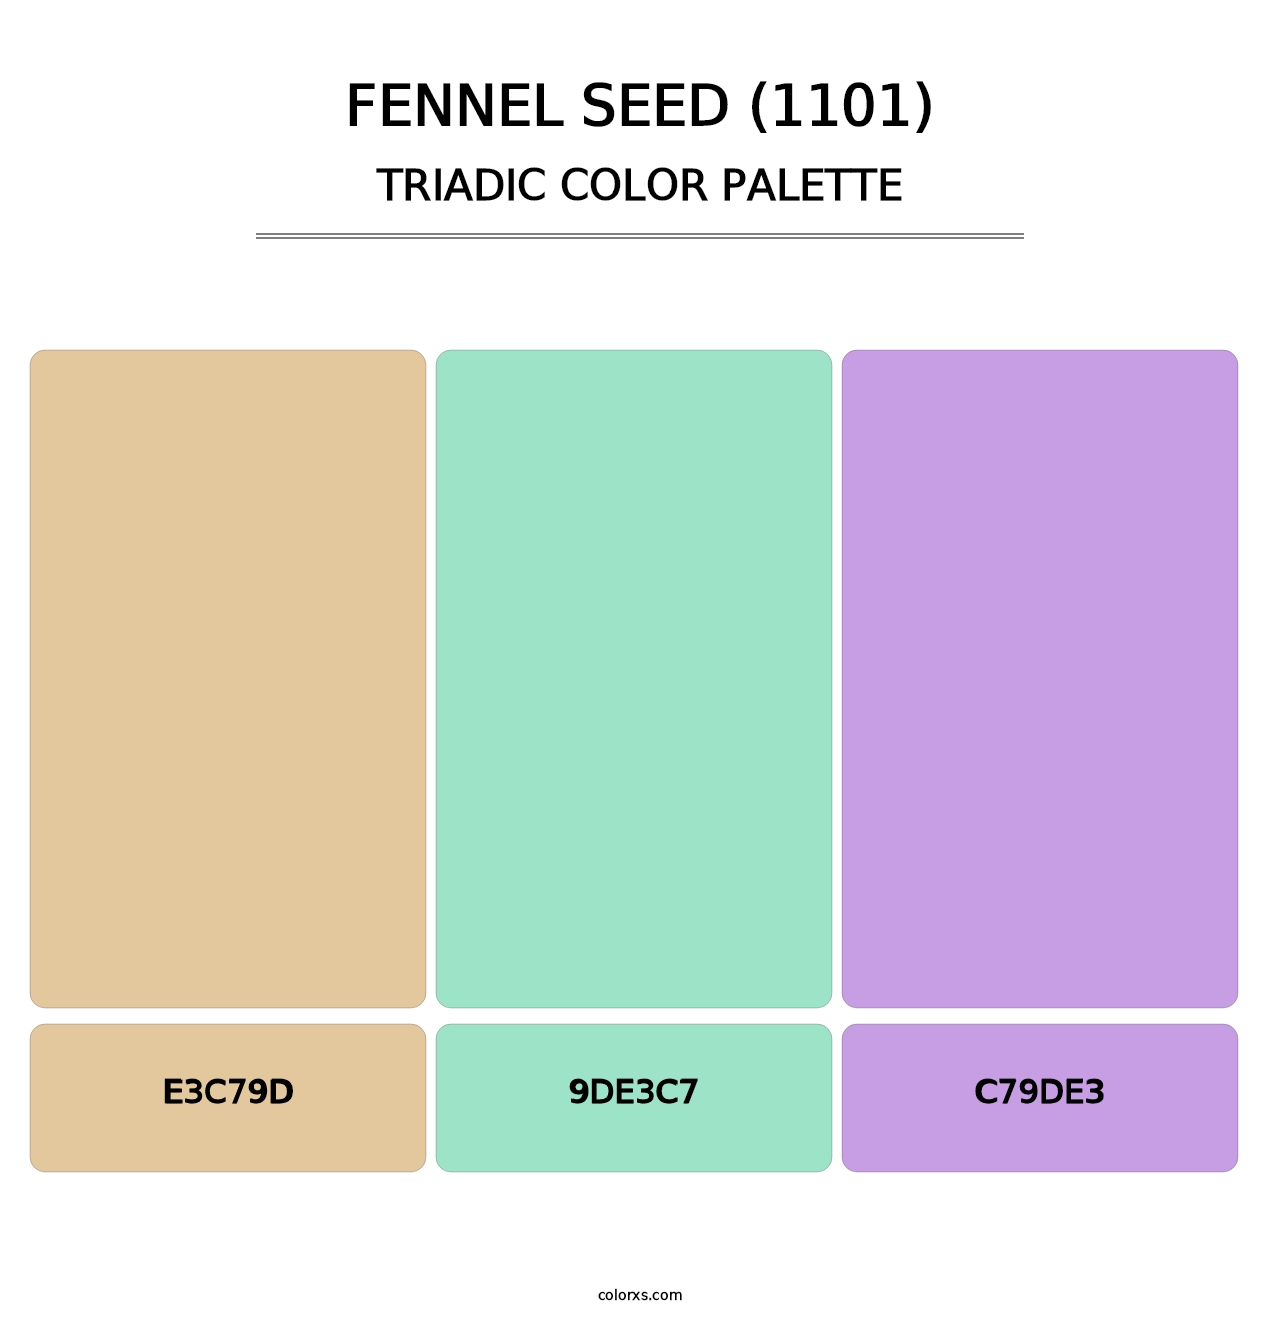 Fennel Seed (1101) - Triadic Color Palette